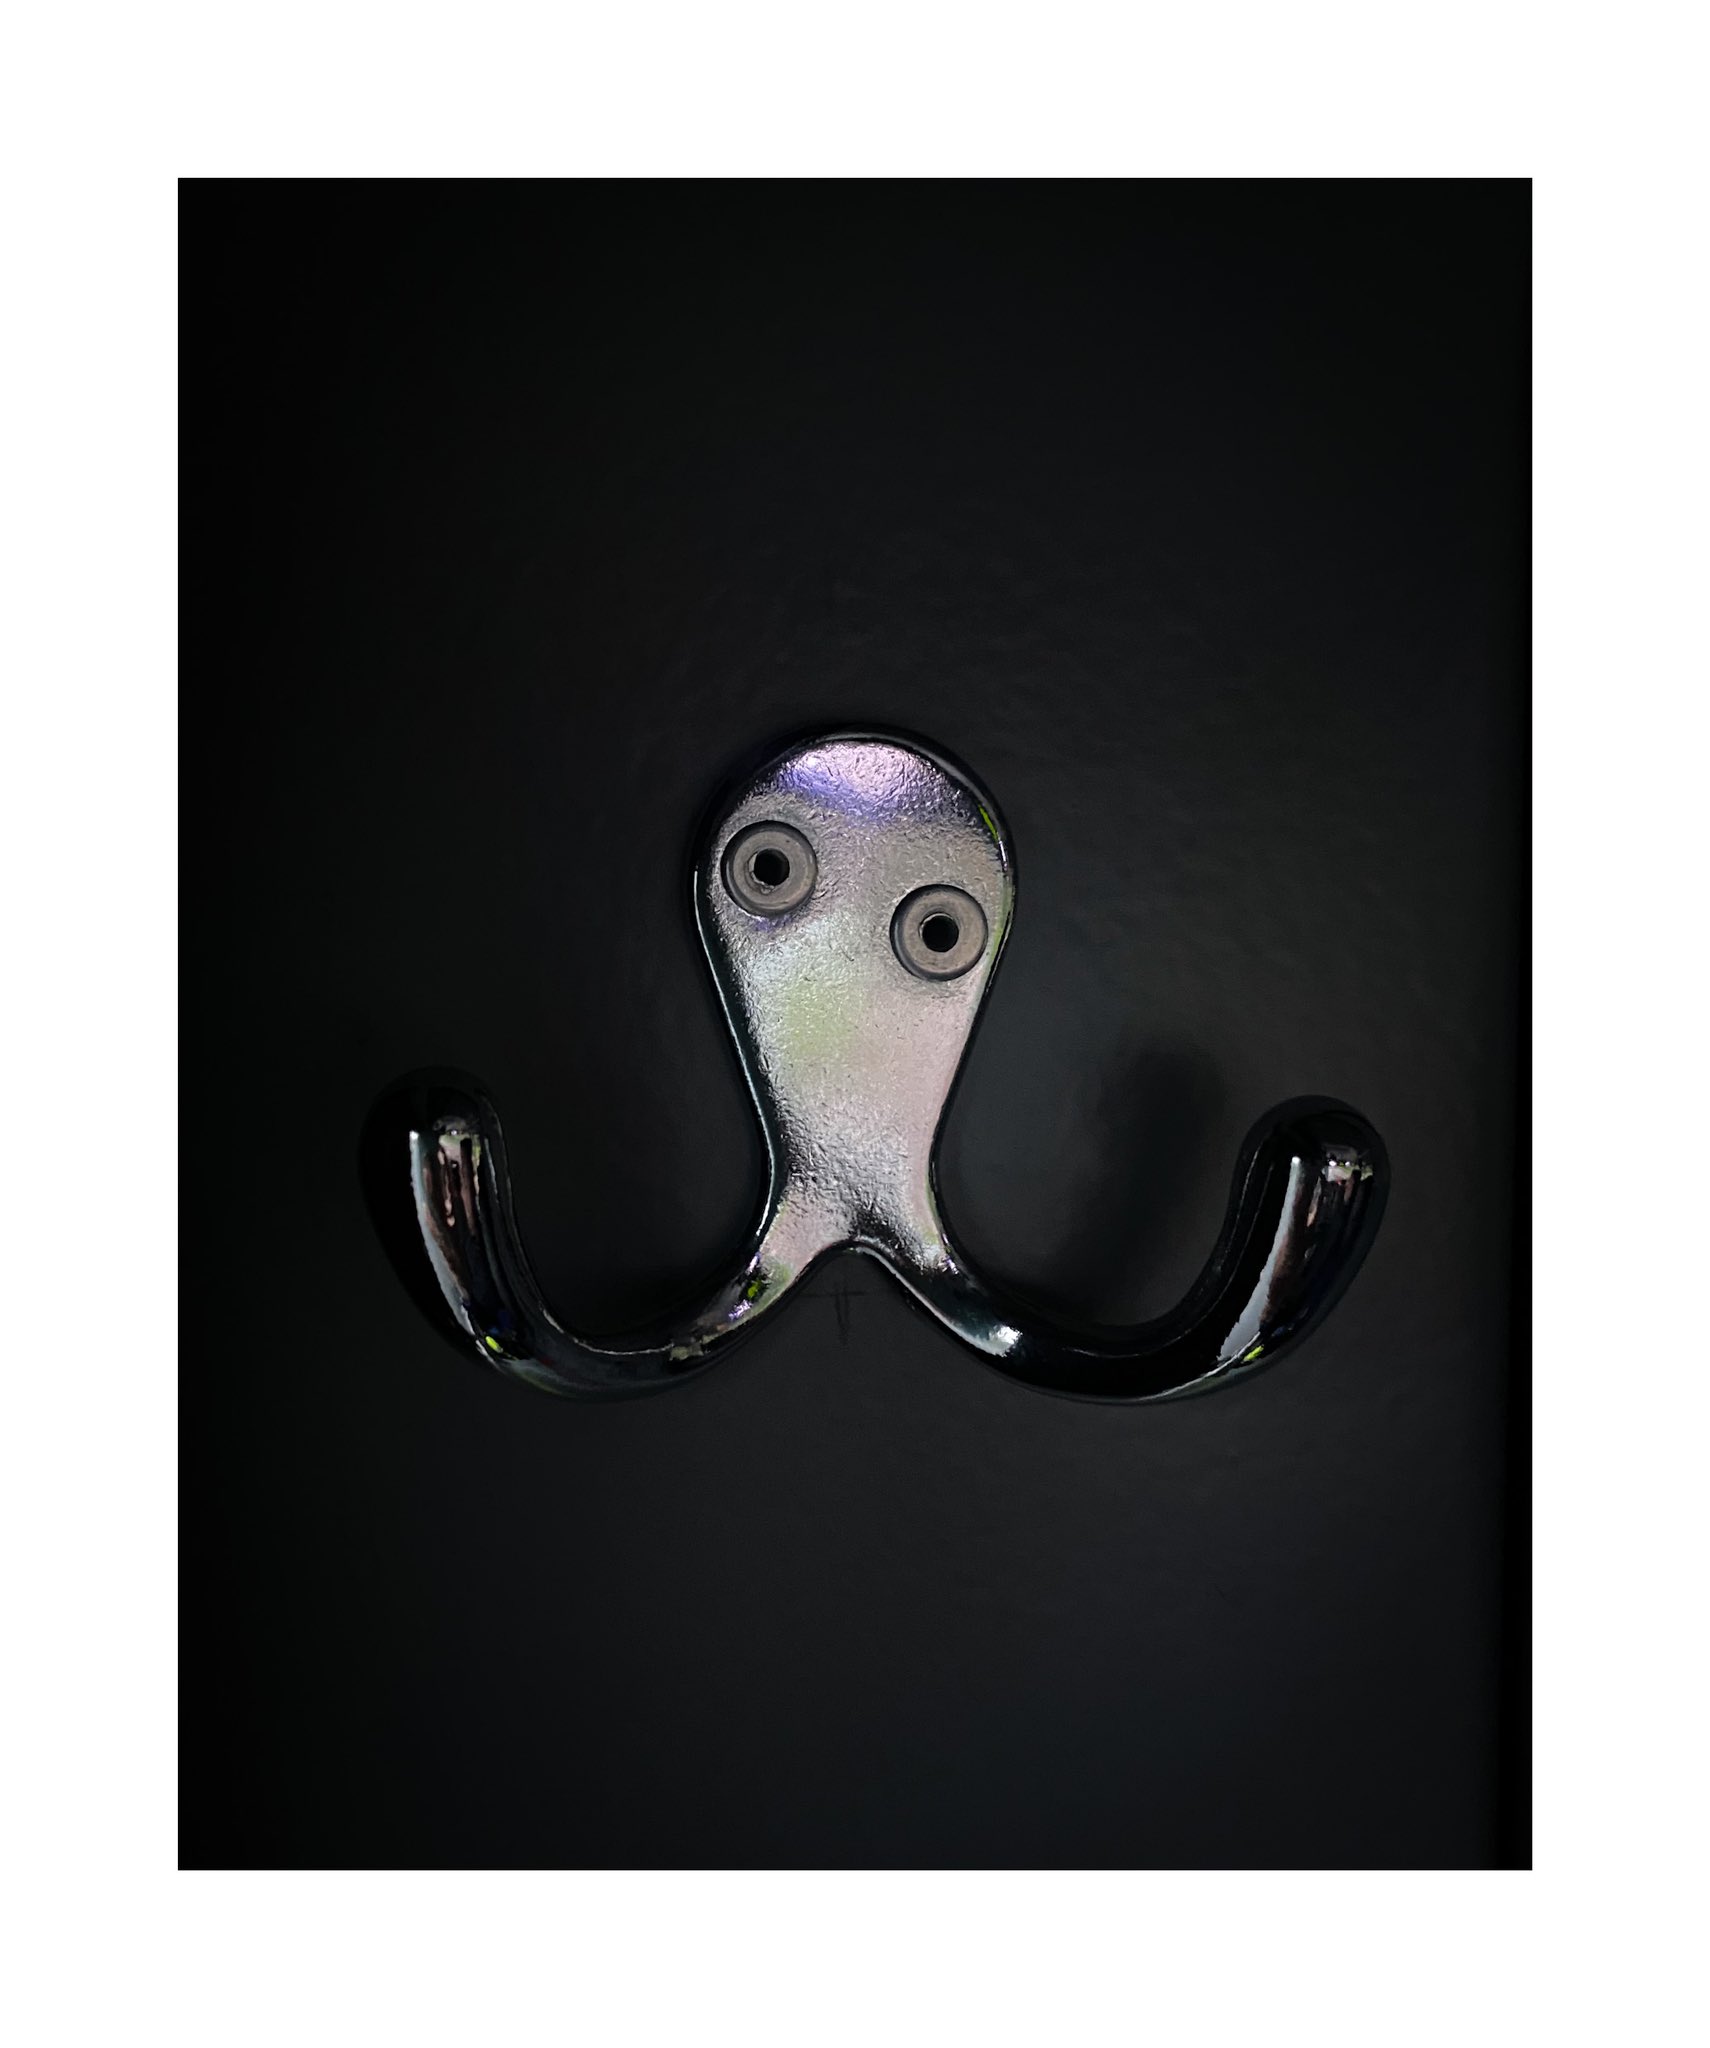 Kevin Hennessy on X: Drunk Octopus wants a fight